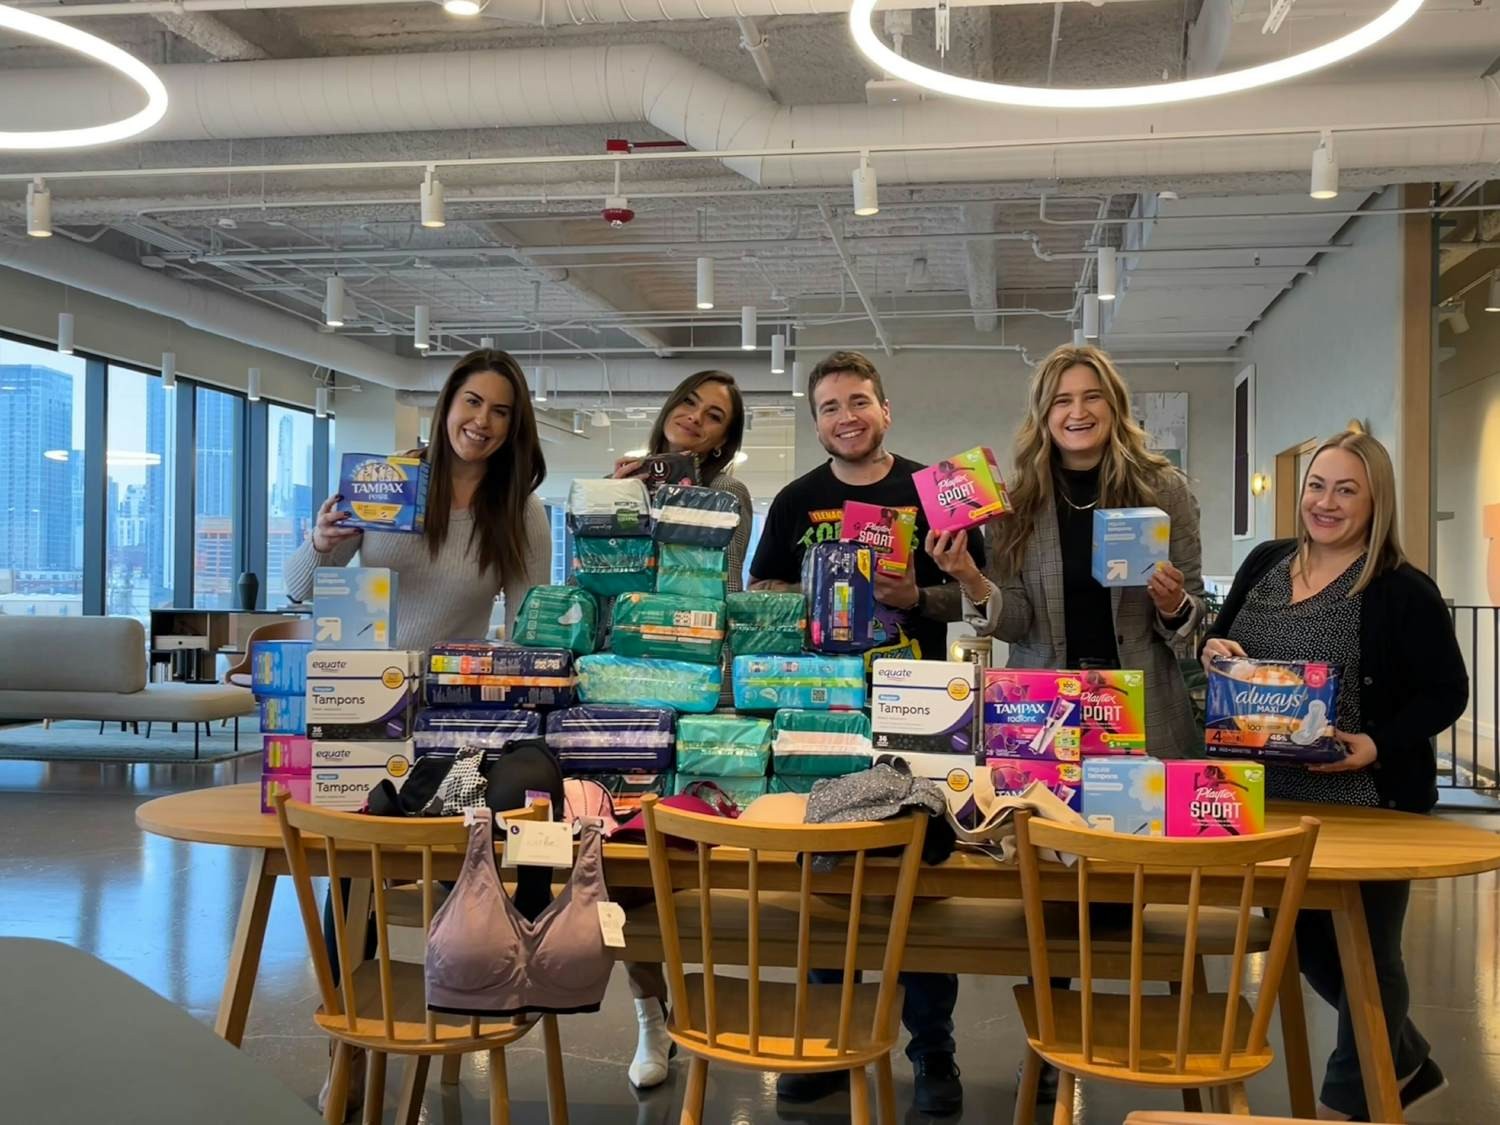 Convene's Chicago team getting together to donate products to Support the Girls